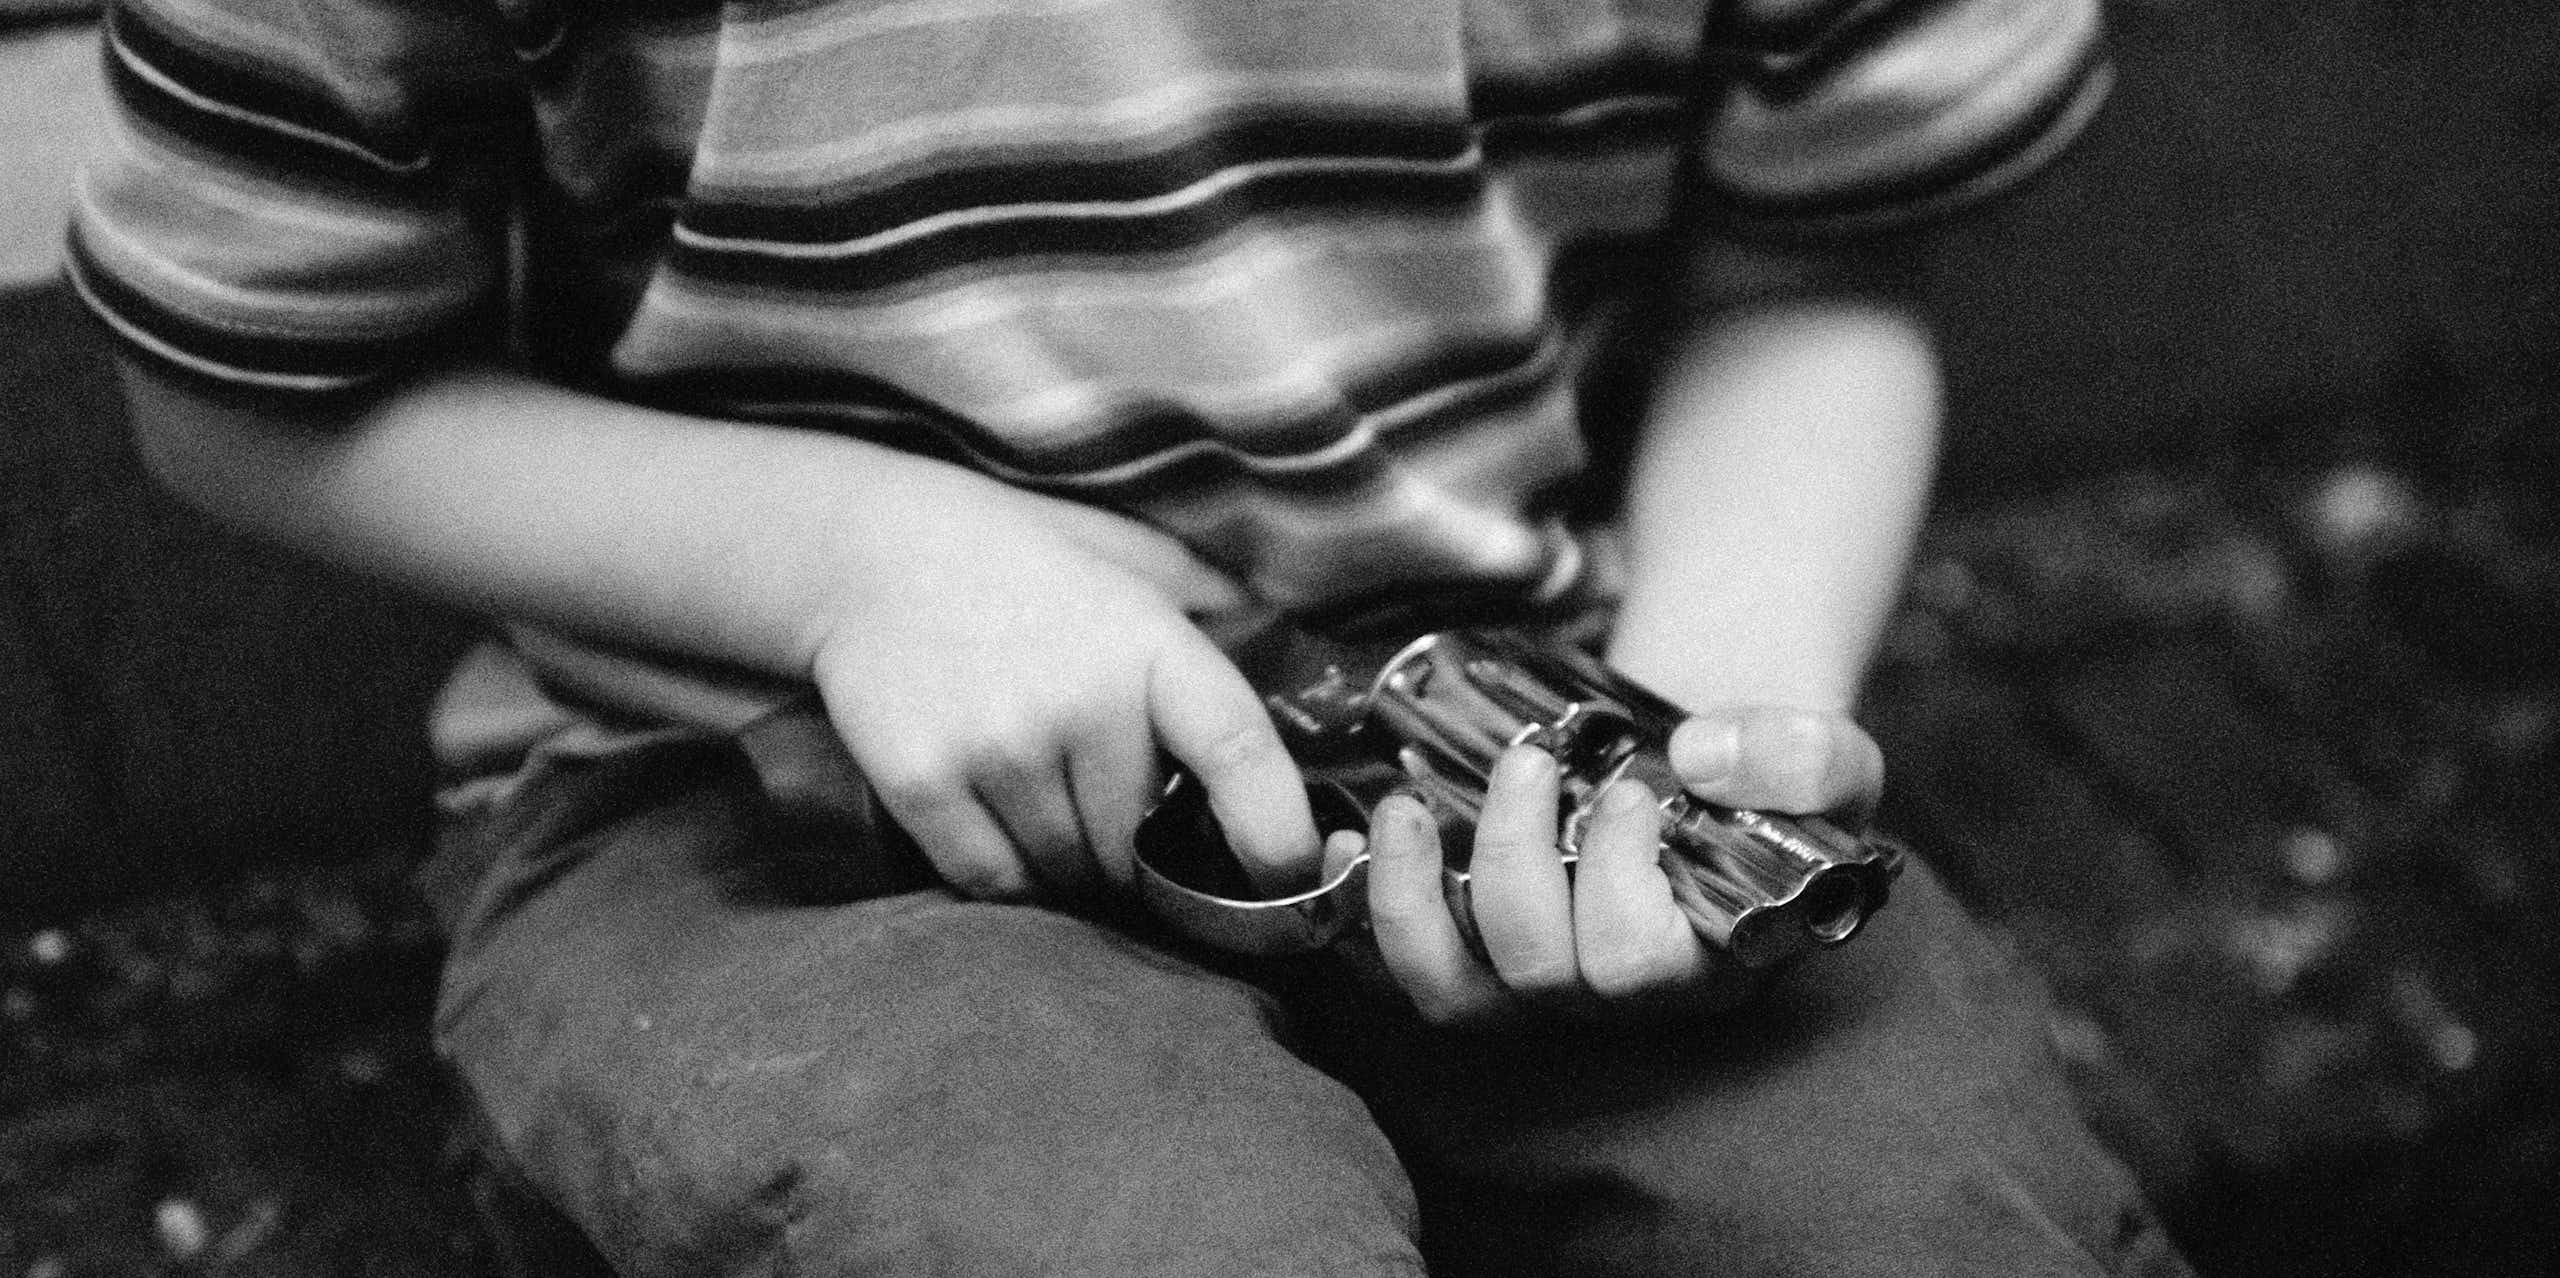 A boy in a striped shirt and shorts holds a revolver. His face is not shown.